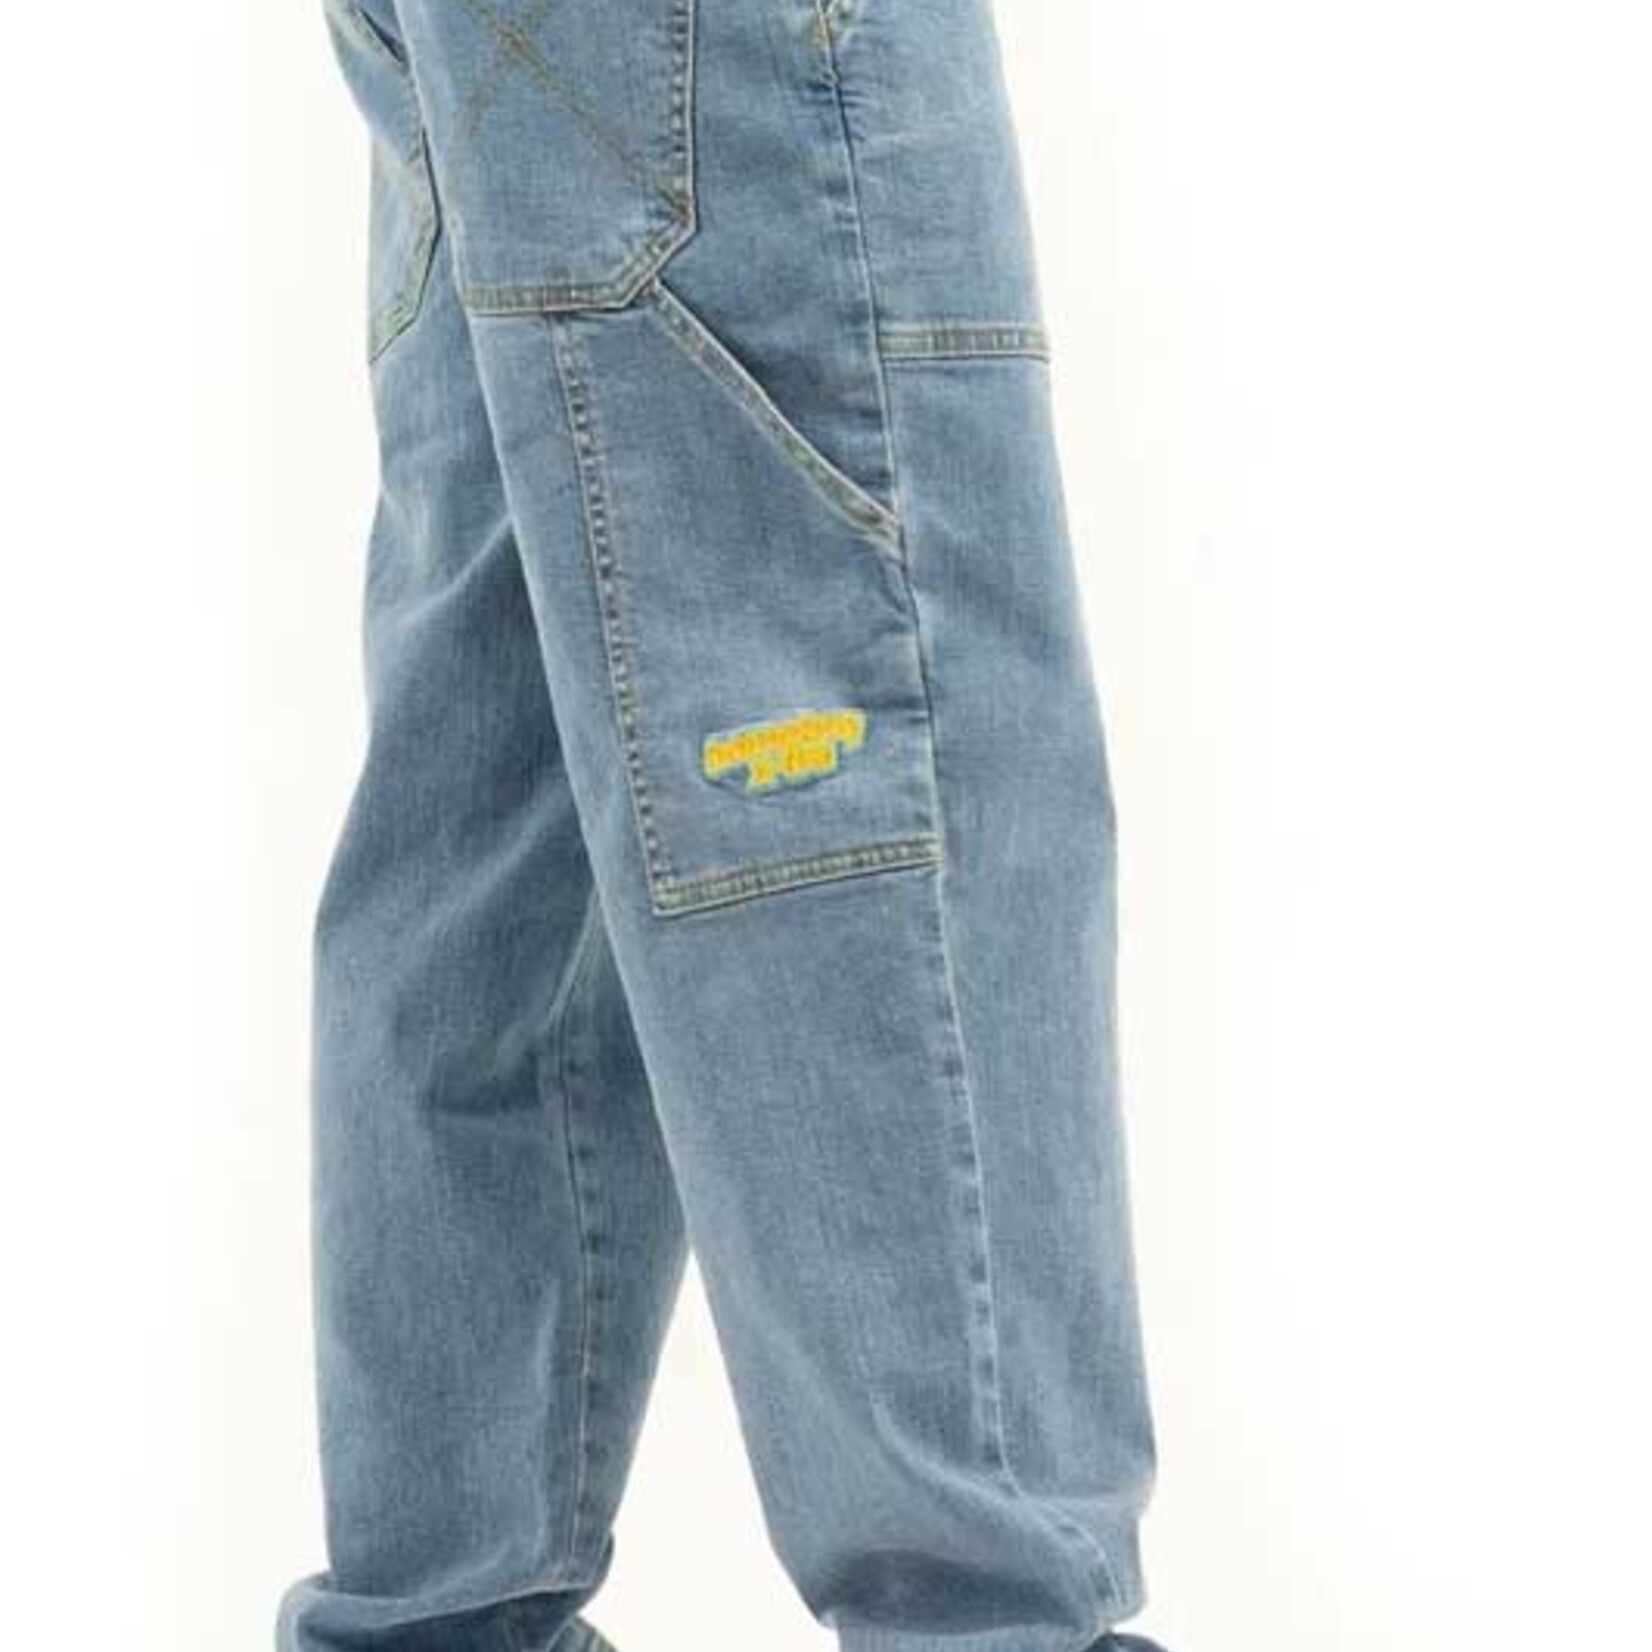 homeboy Homeboy jeans x-tra work pants moon